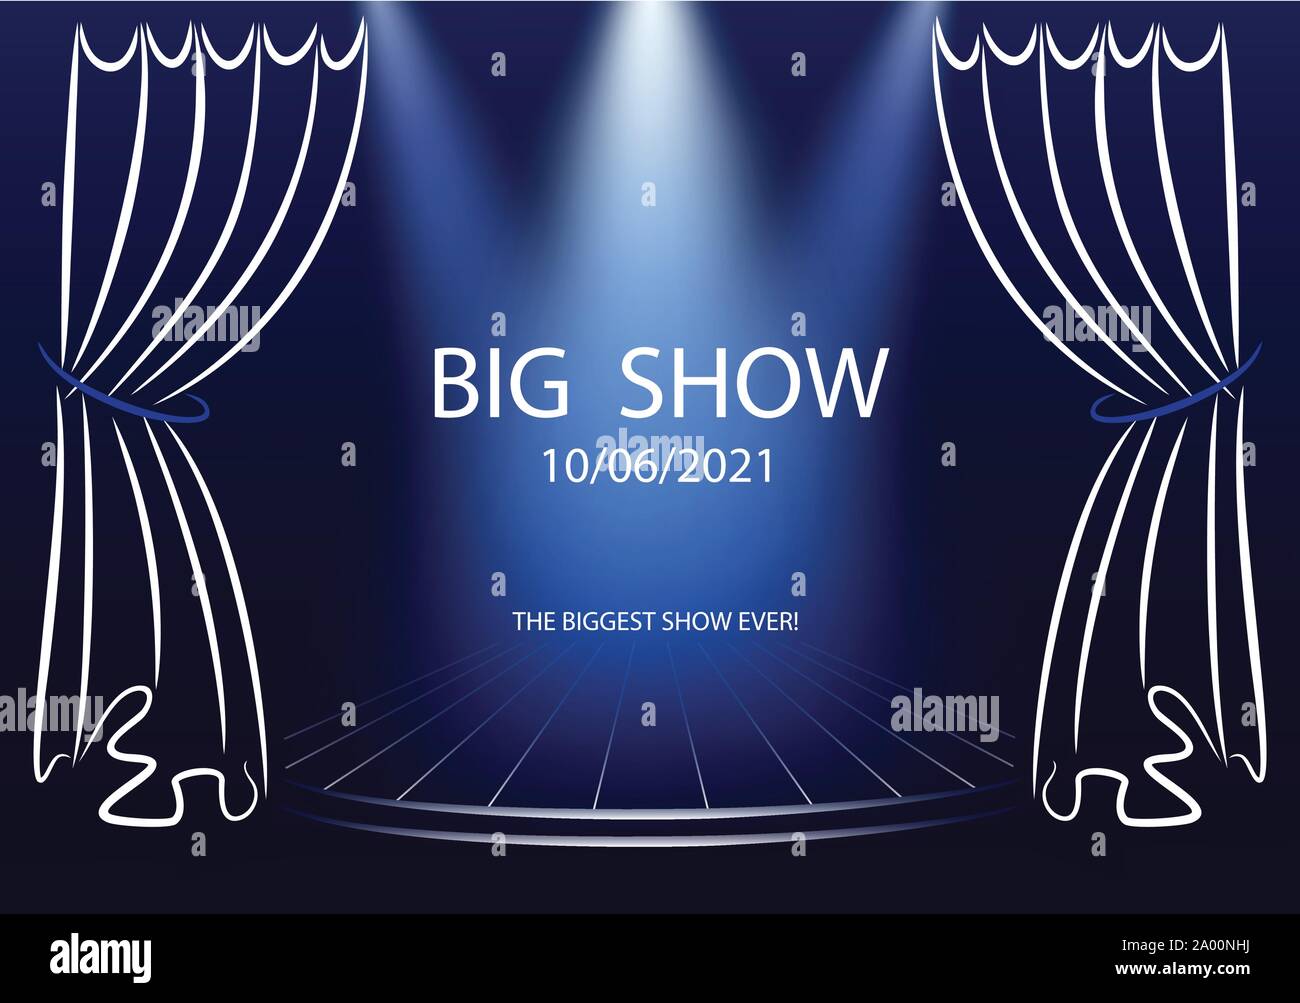 Big show poster template. Announcement template Stock Vector